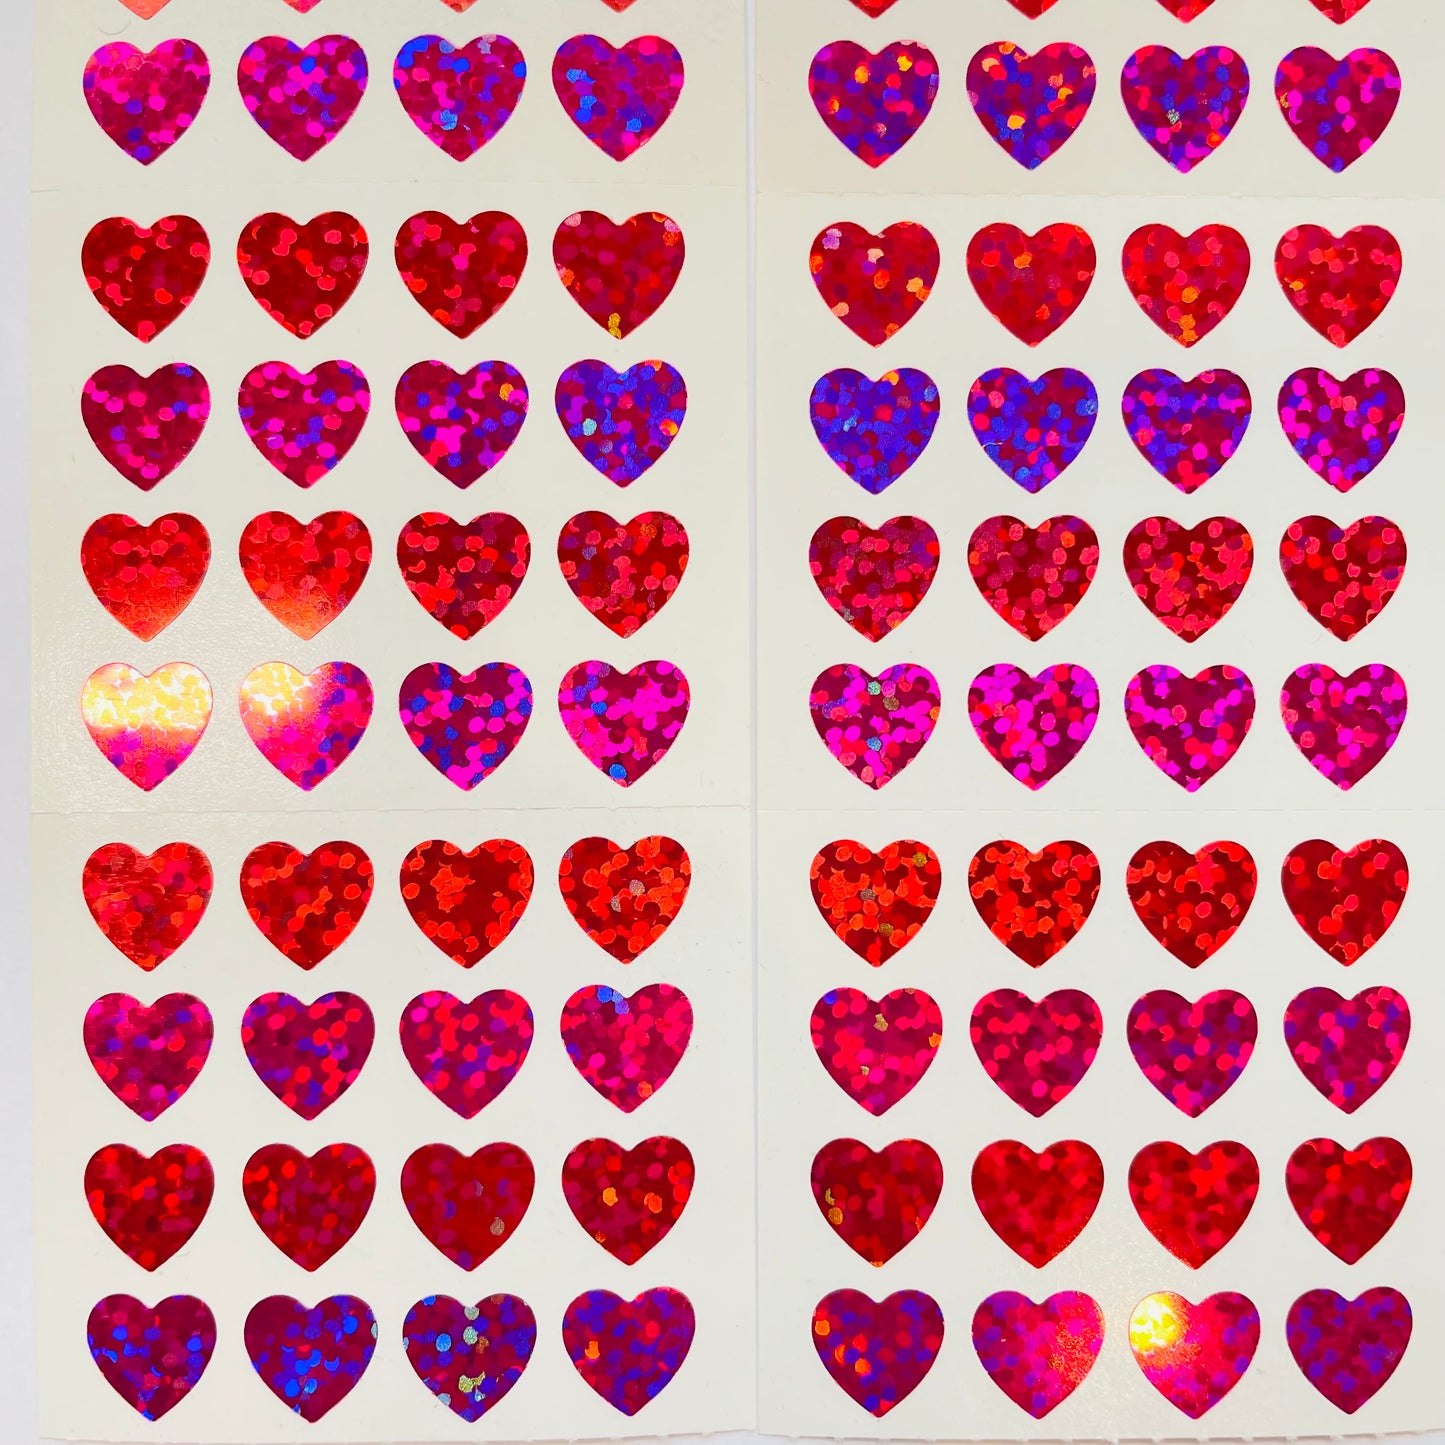 HAMBLY: Micro Pink and Red Hearts glitter stickers